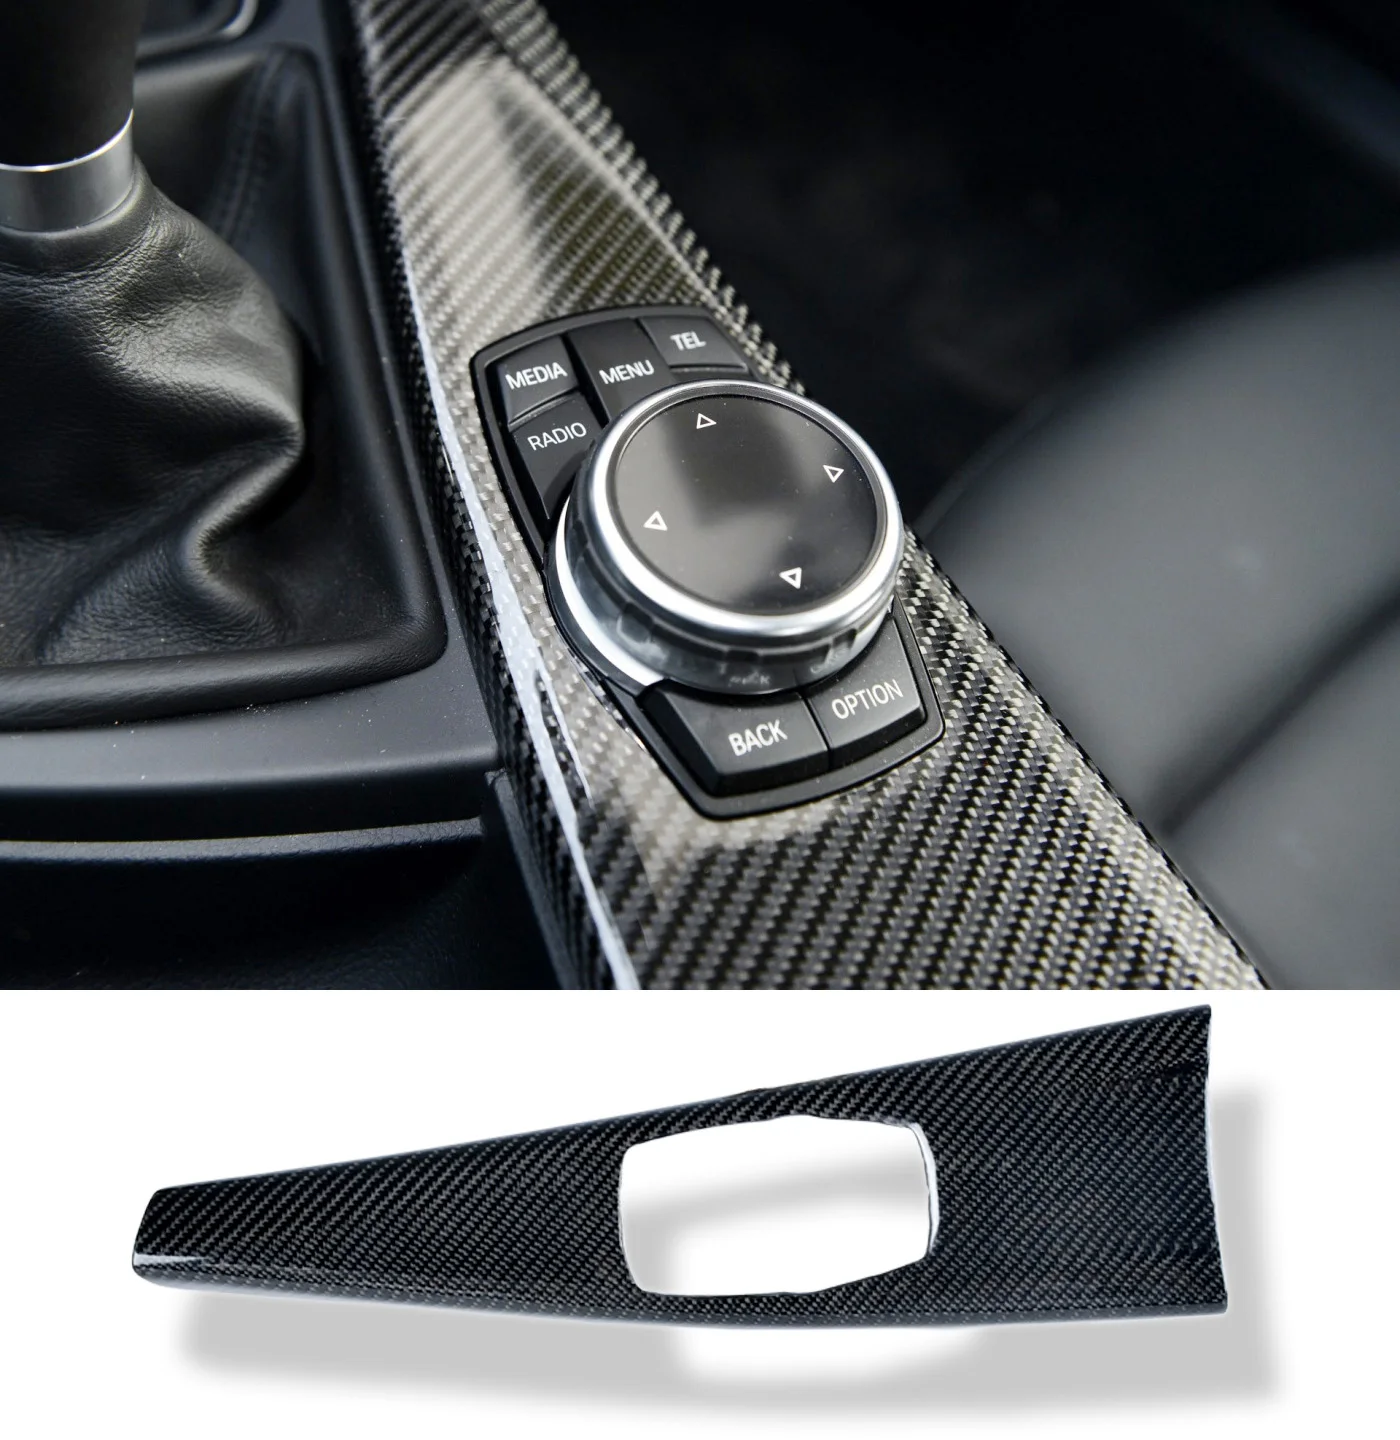 

For BMW 3 4 Series F30 Real Carbon Fiber Center Control Panel/Gear Shift Panel /Inside Door Handle/Multimedia Control Cover Trim